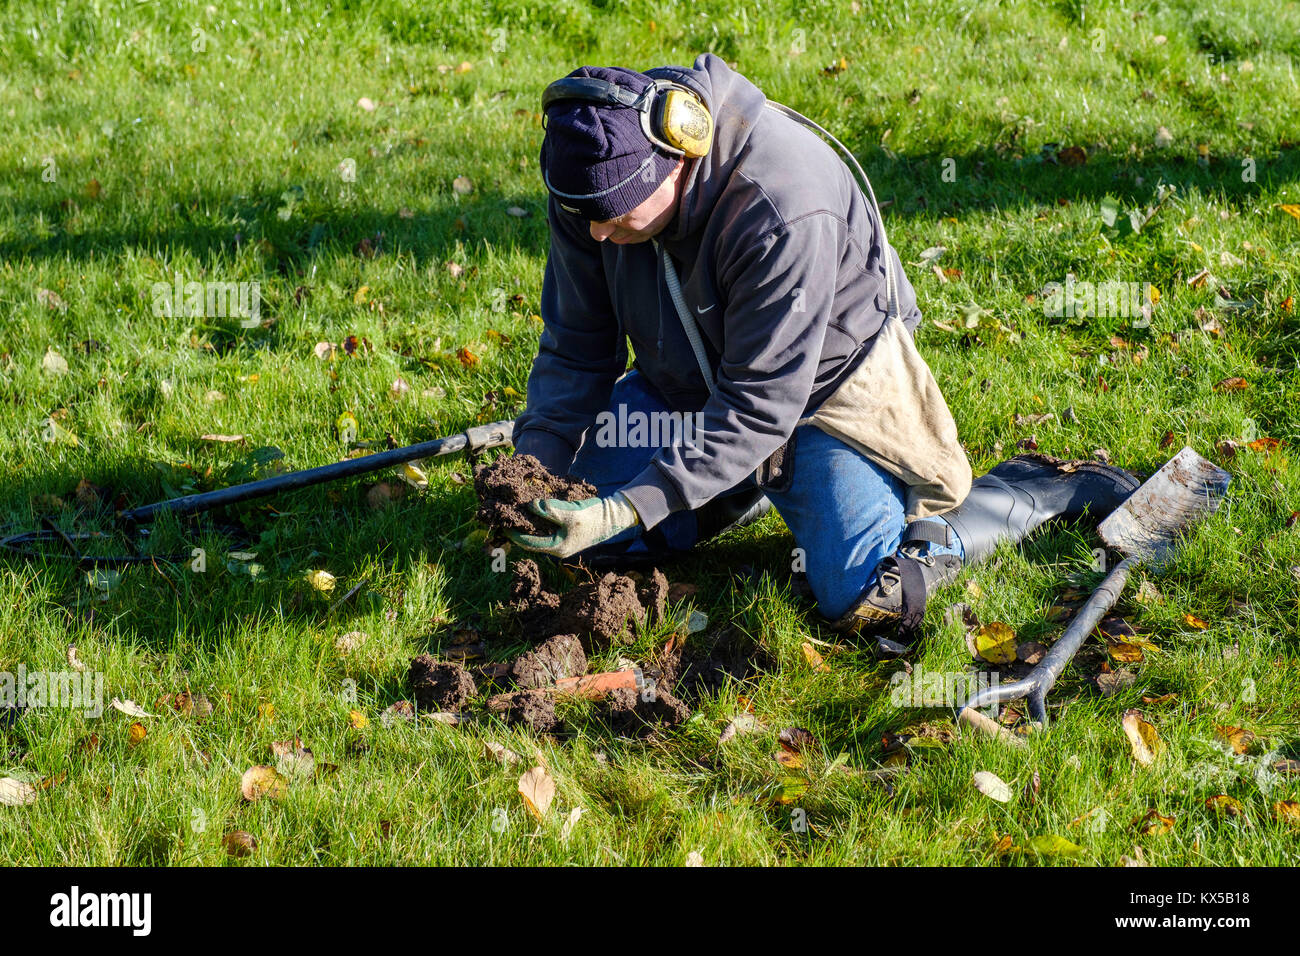 MAN KNEELING TO EXAMINE FIND WHILE METAL DETECTING IN OLD ORCHARD. UK Stock Photo